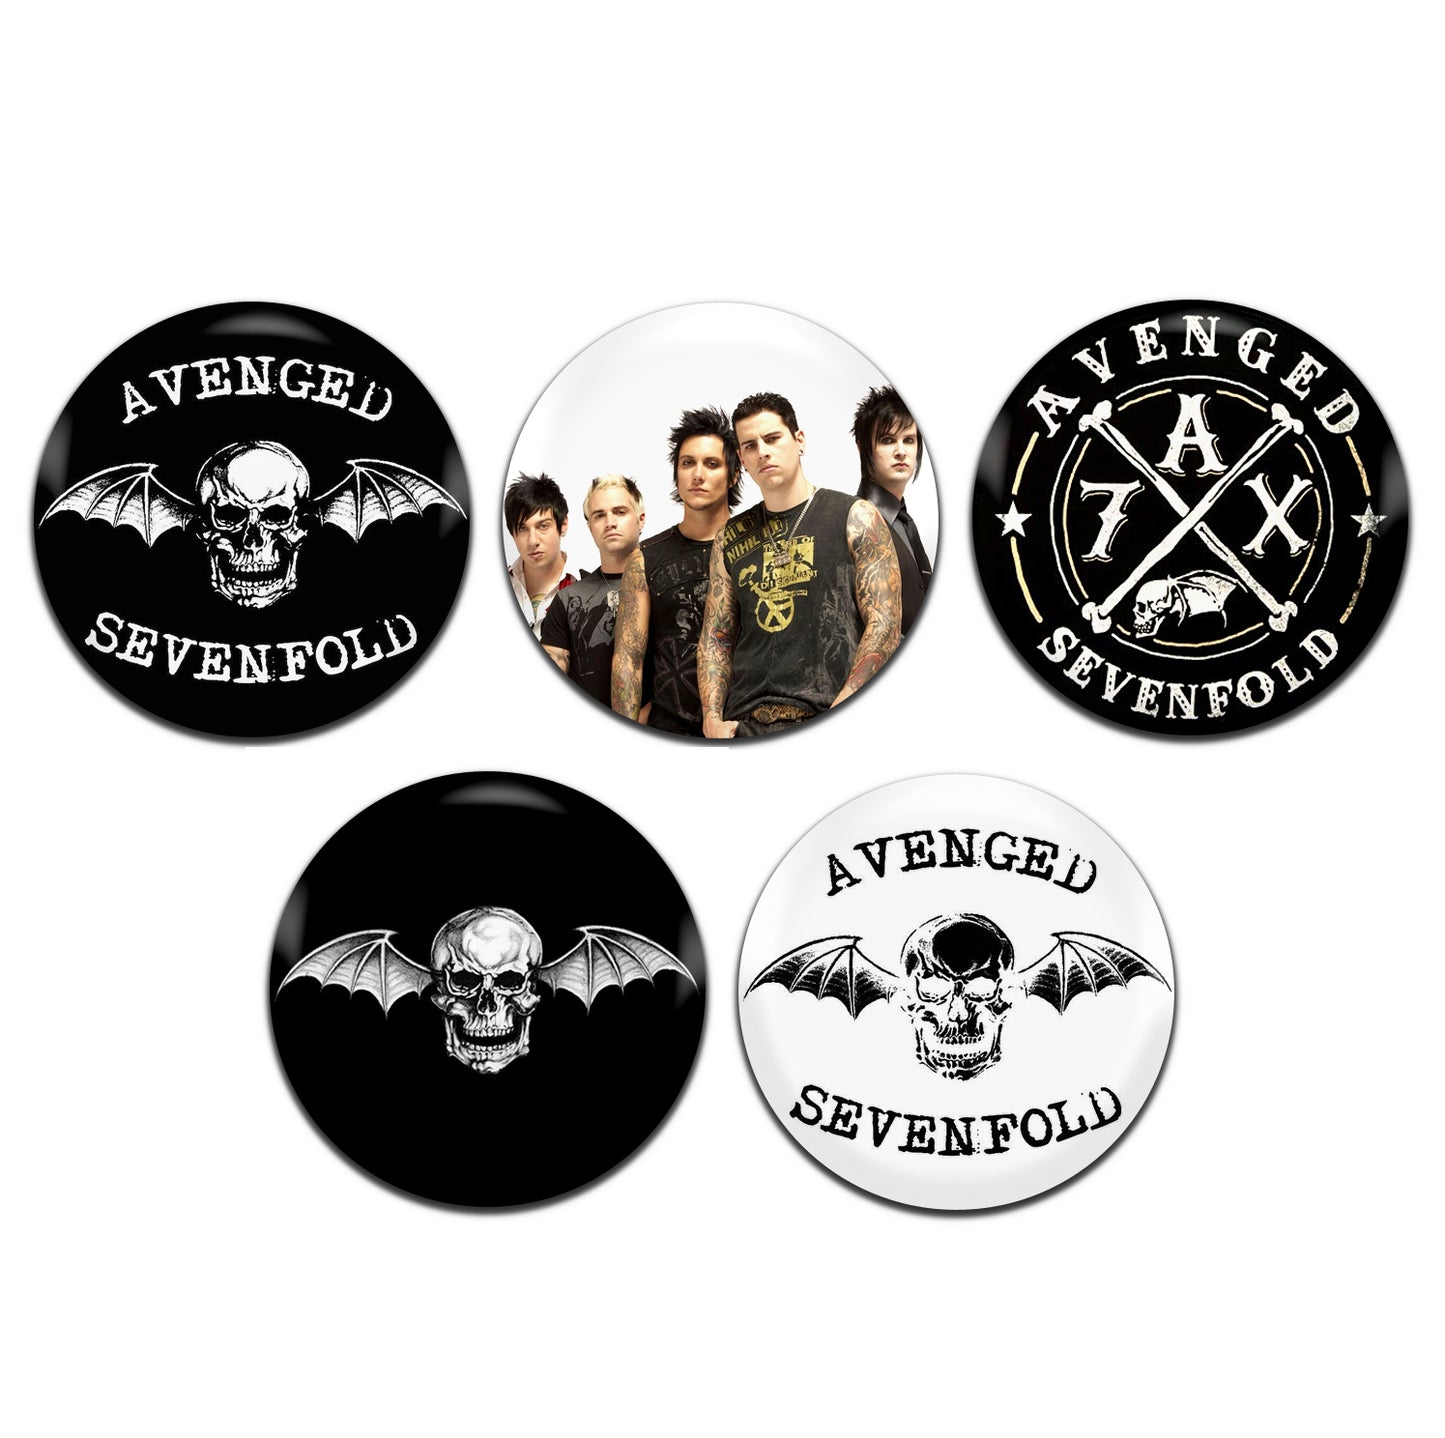 Avenged Sevenfold Heavy Metal Rock Band 00's 25mm / 1 Inch D-Pin Button Badges (5x Set)